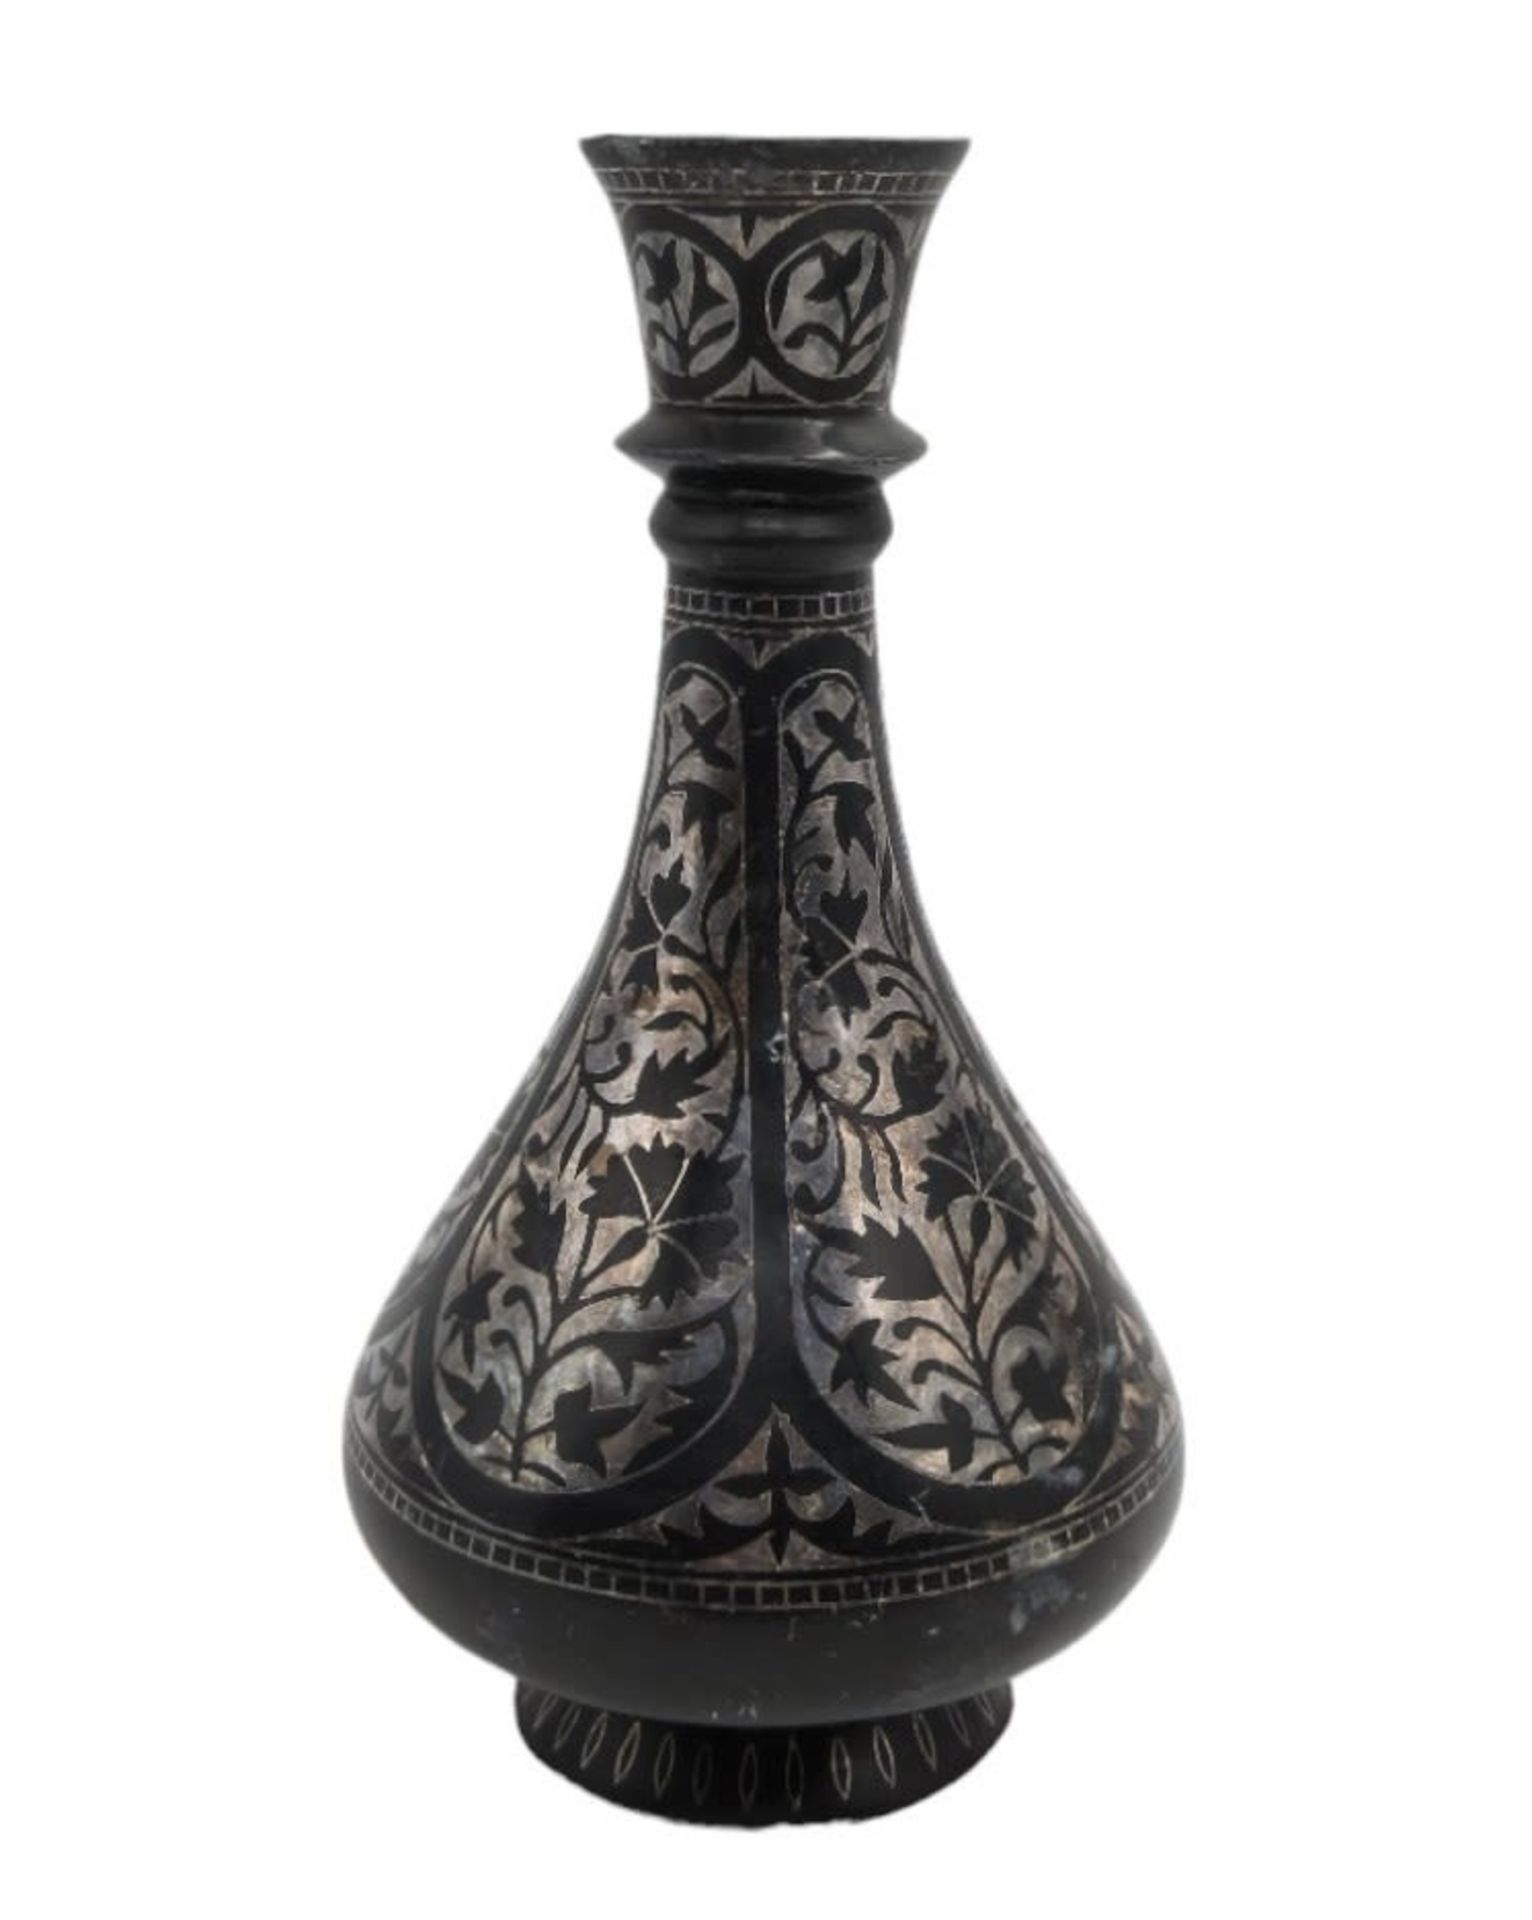 An antique Indian Bidri vase, made of metal inlaid with silver, second half of the 19th century, - Bild 4 aus 5